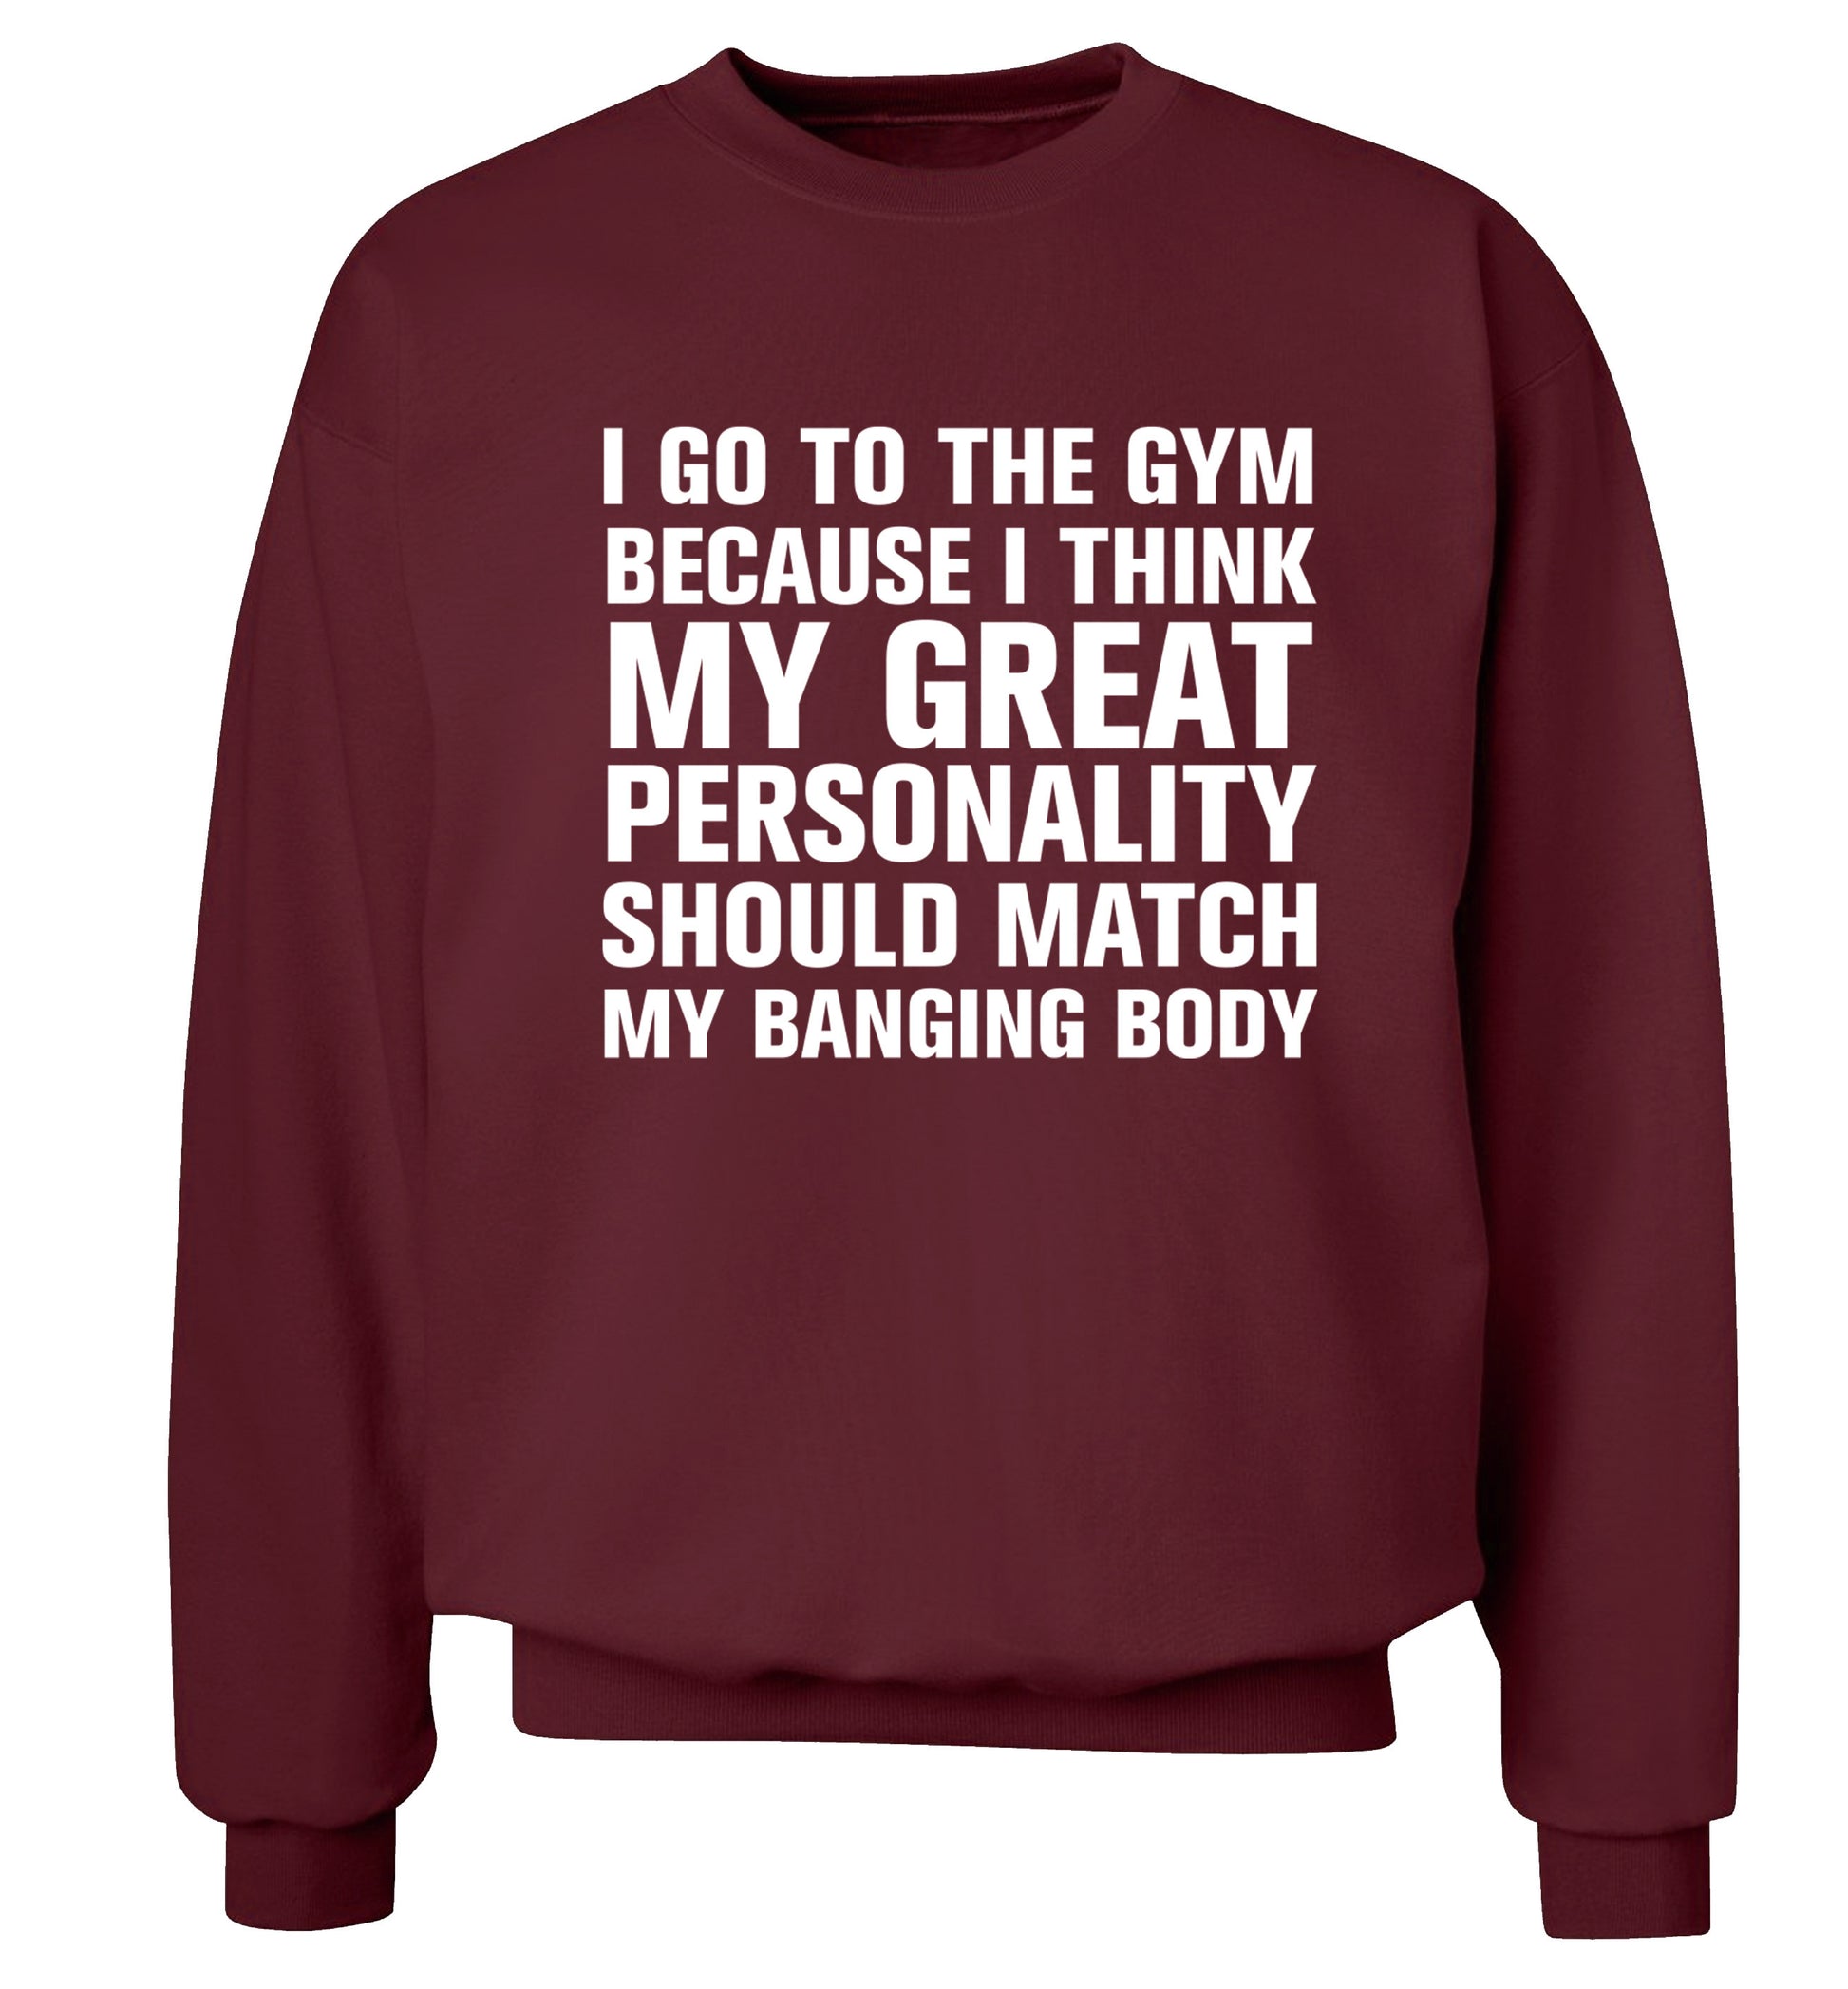 I go to the gym because I think my great personality should match my banging body Adult's unisex maroon Sweater 2XL